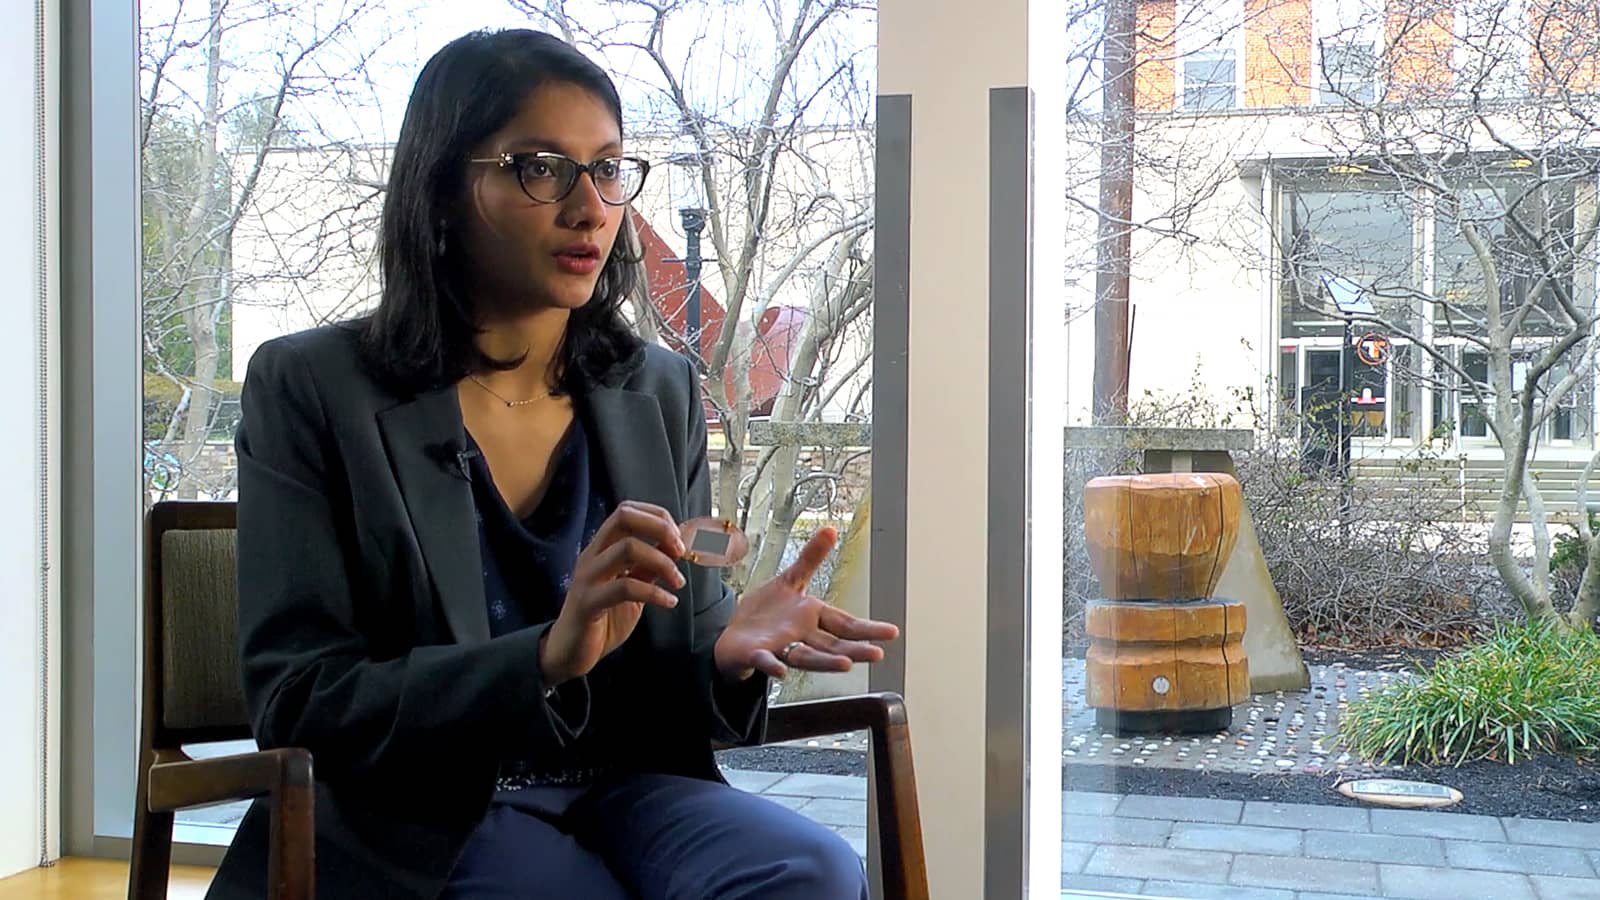 Neereja Sundaresan discusses her research, sitting in front of a window, with the main entrance of the Engineering school in the background.